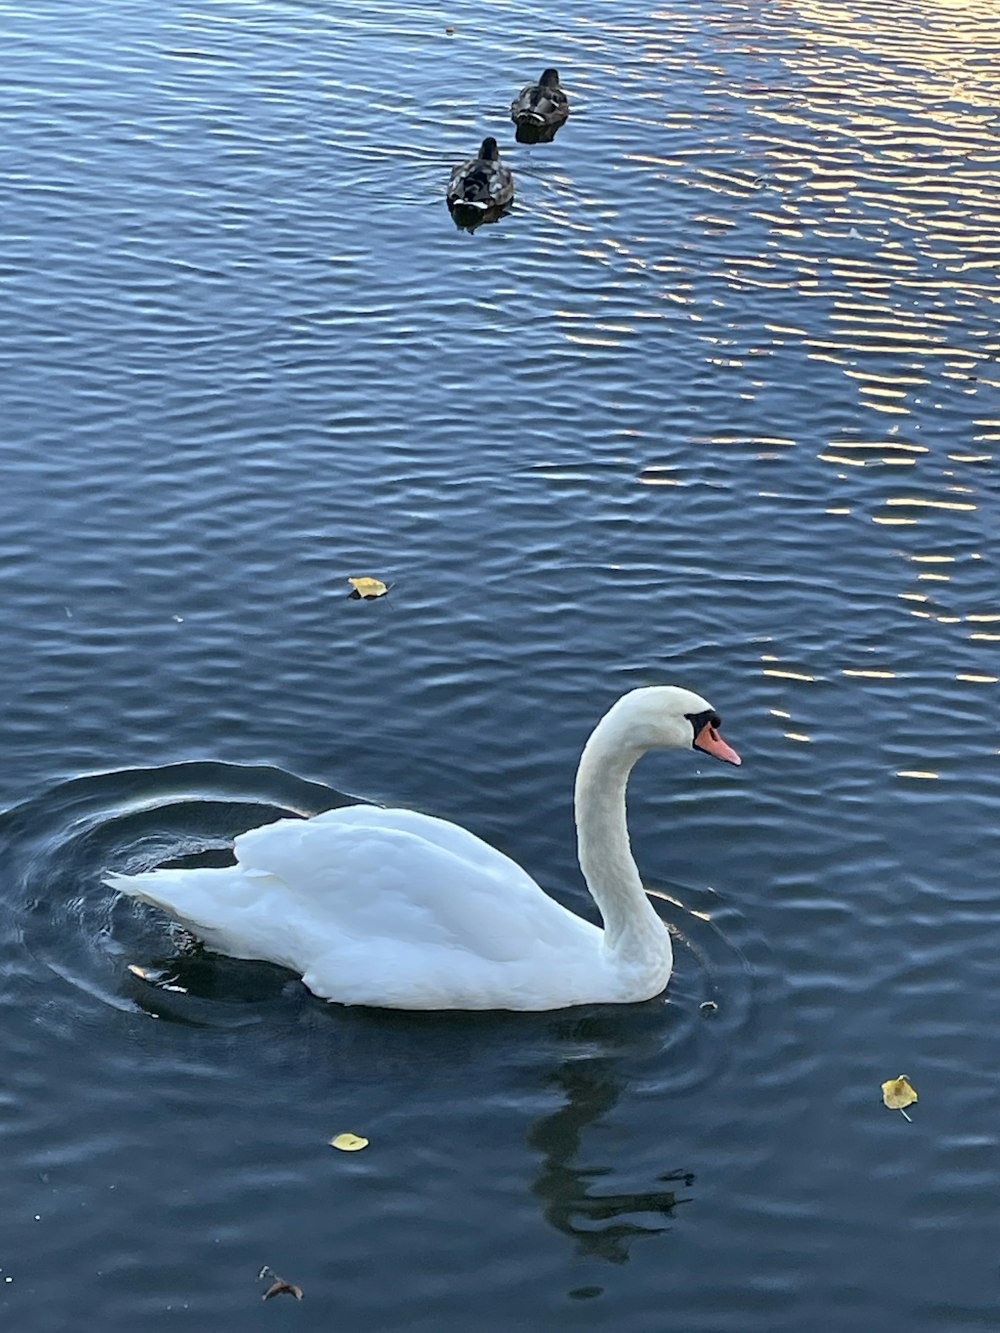 a swan swimming in water with ducks